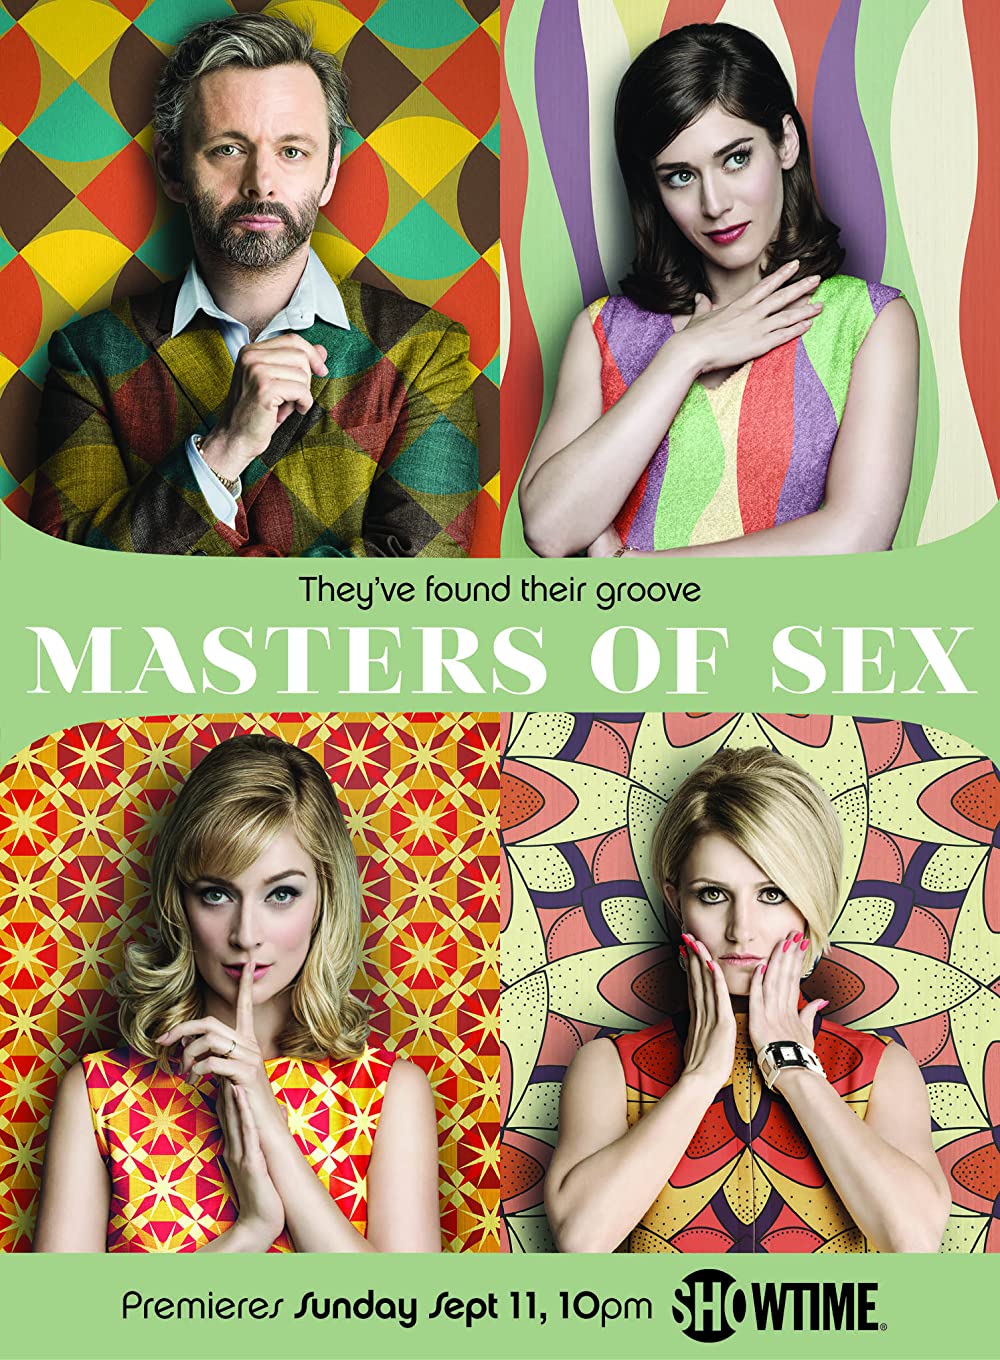 Masters Of Sex Hottest Series On Amazon Prime The Best Of Indian Pop Culture And Whats Trending